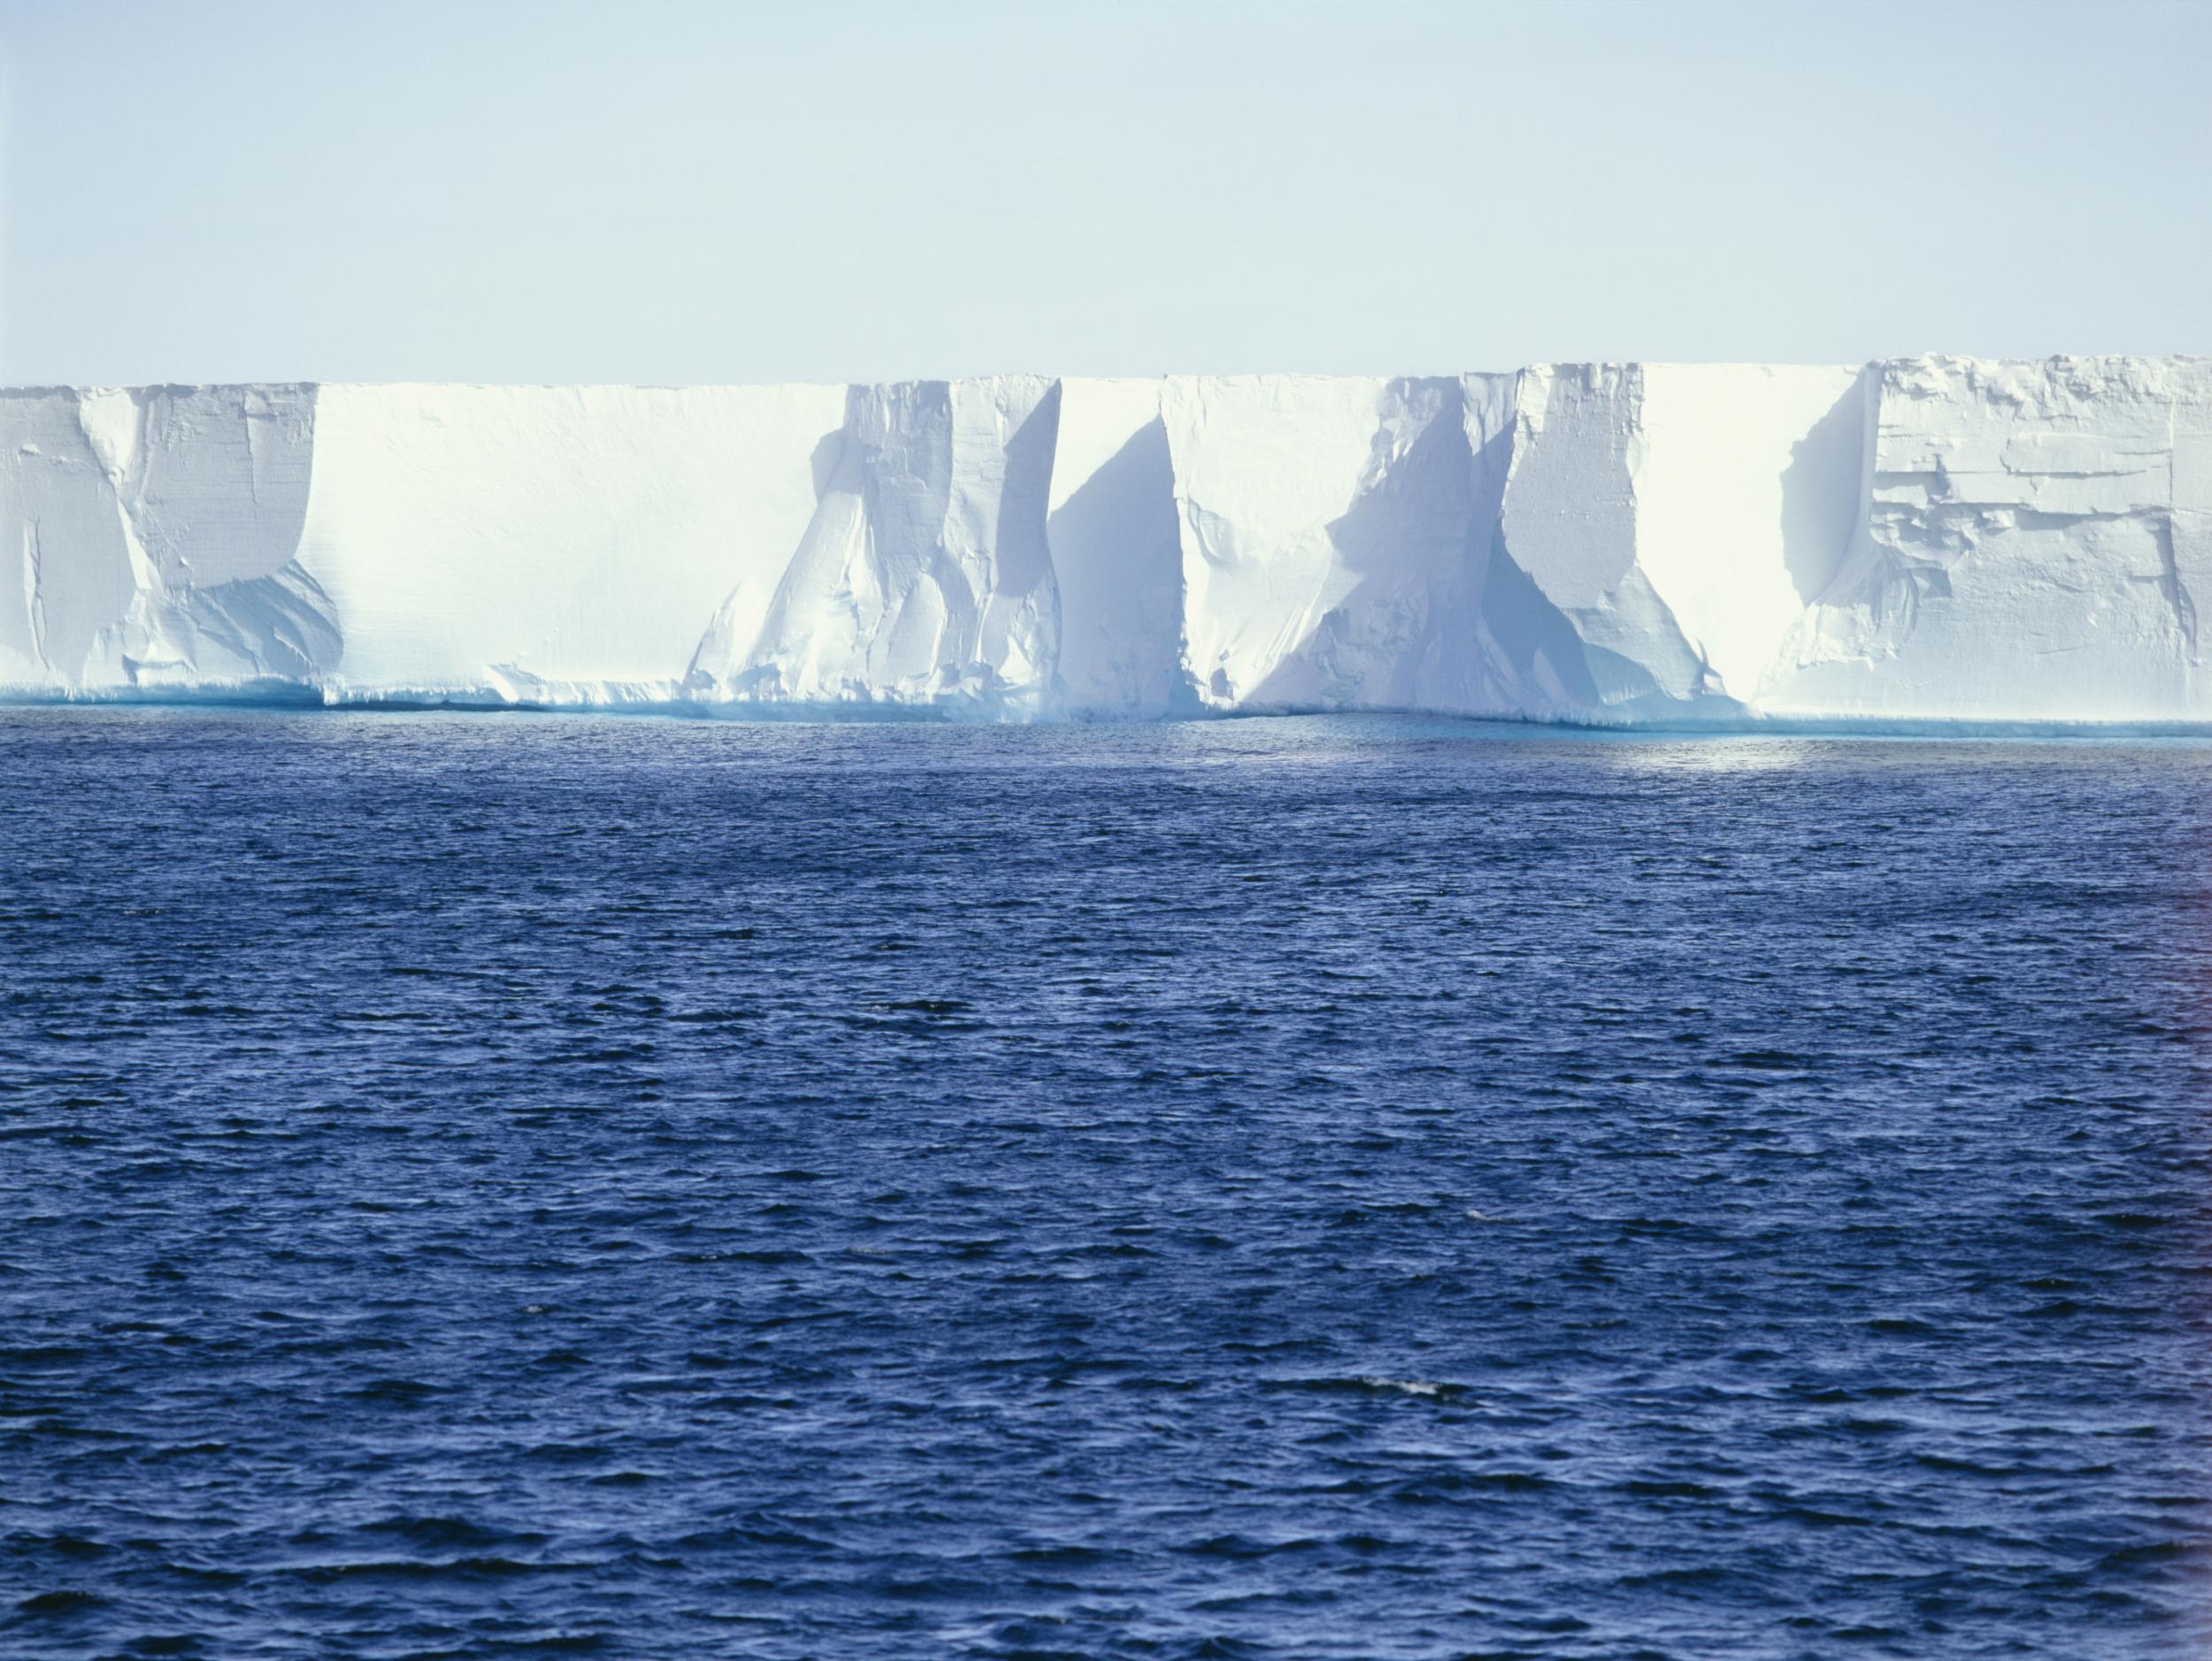 The vertical ice cliff to the open ocean is more than 350 miles long and is up to 50m high above sea level